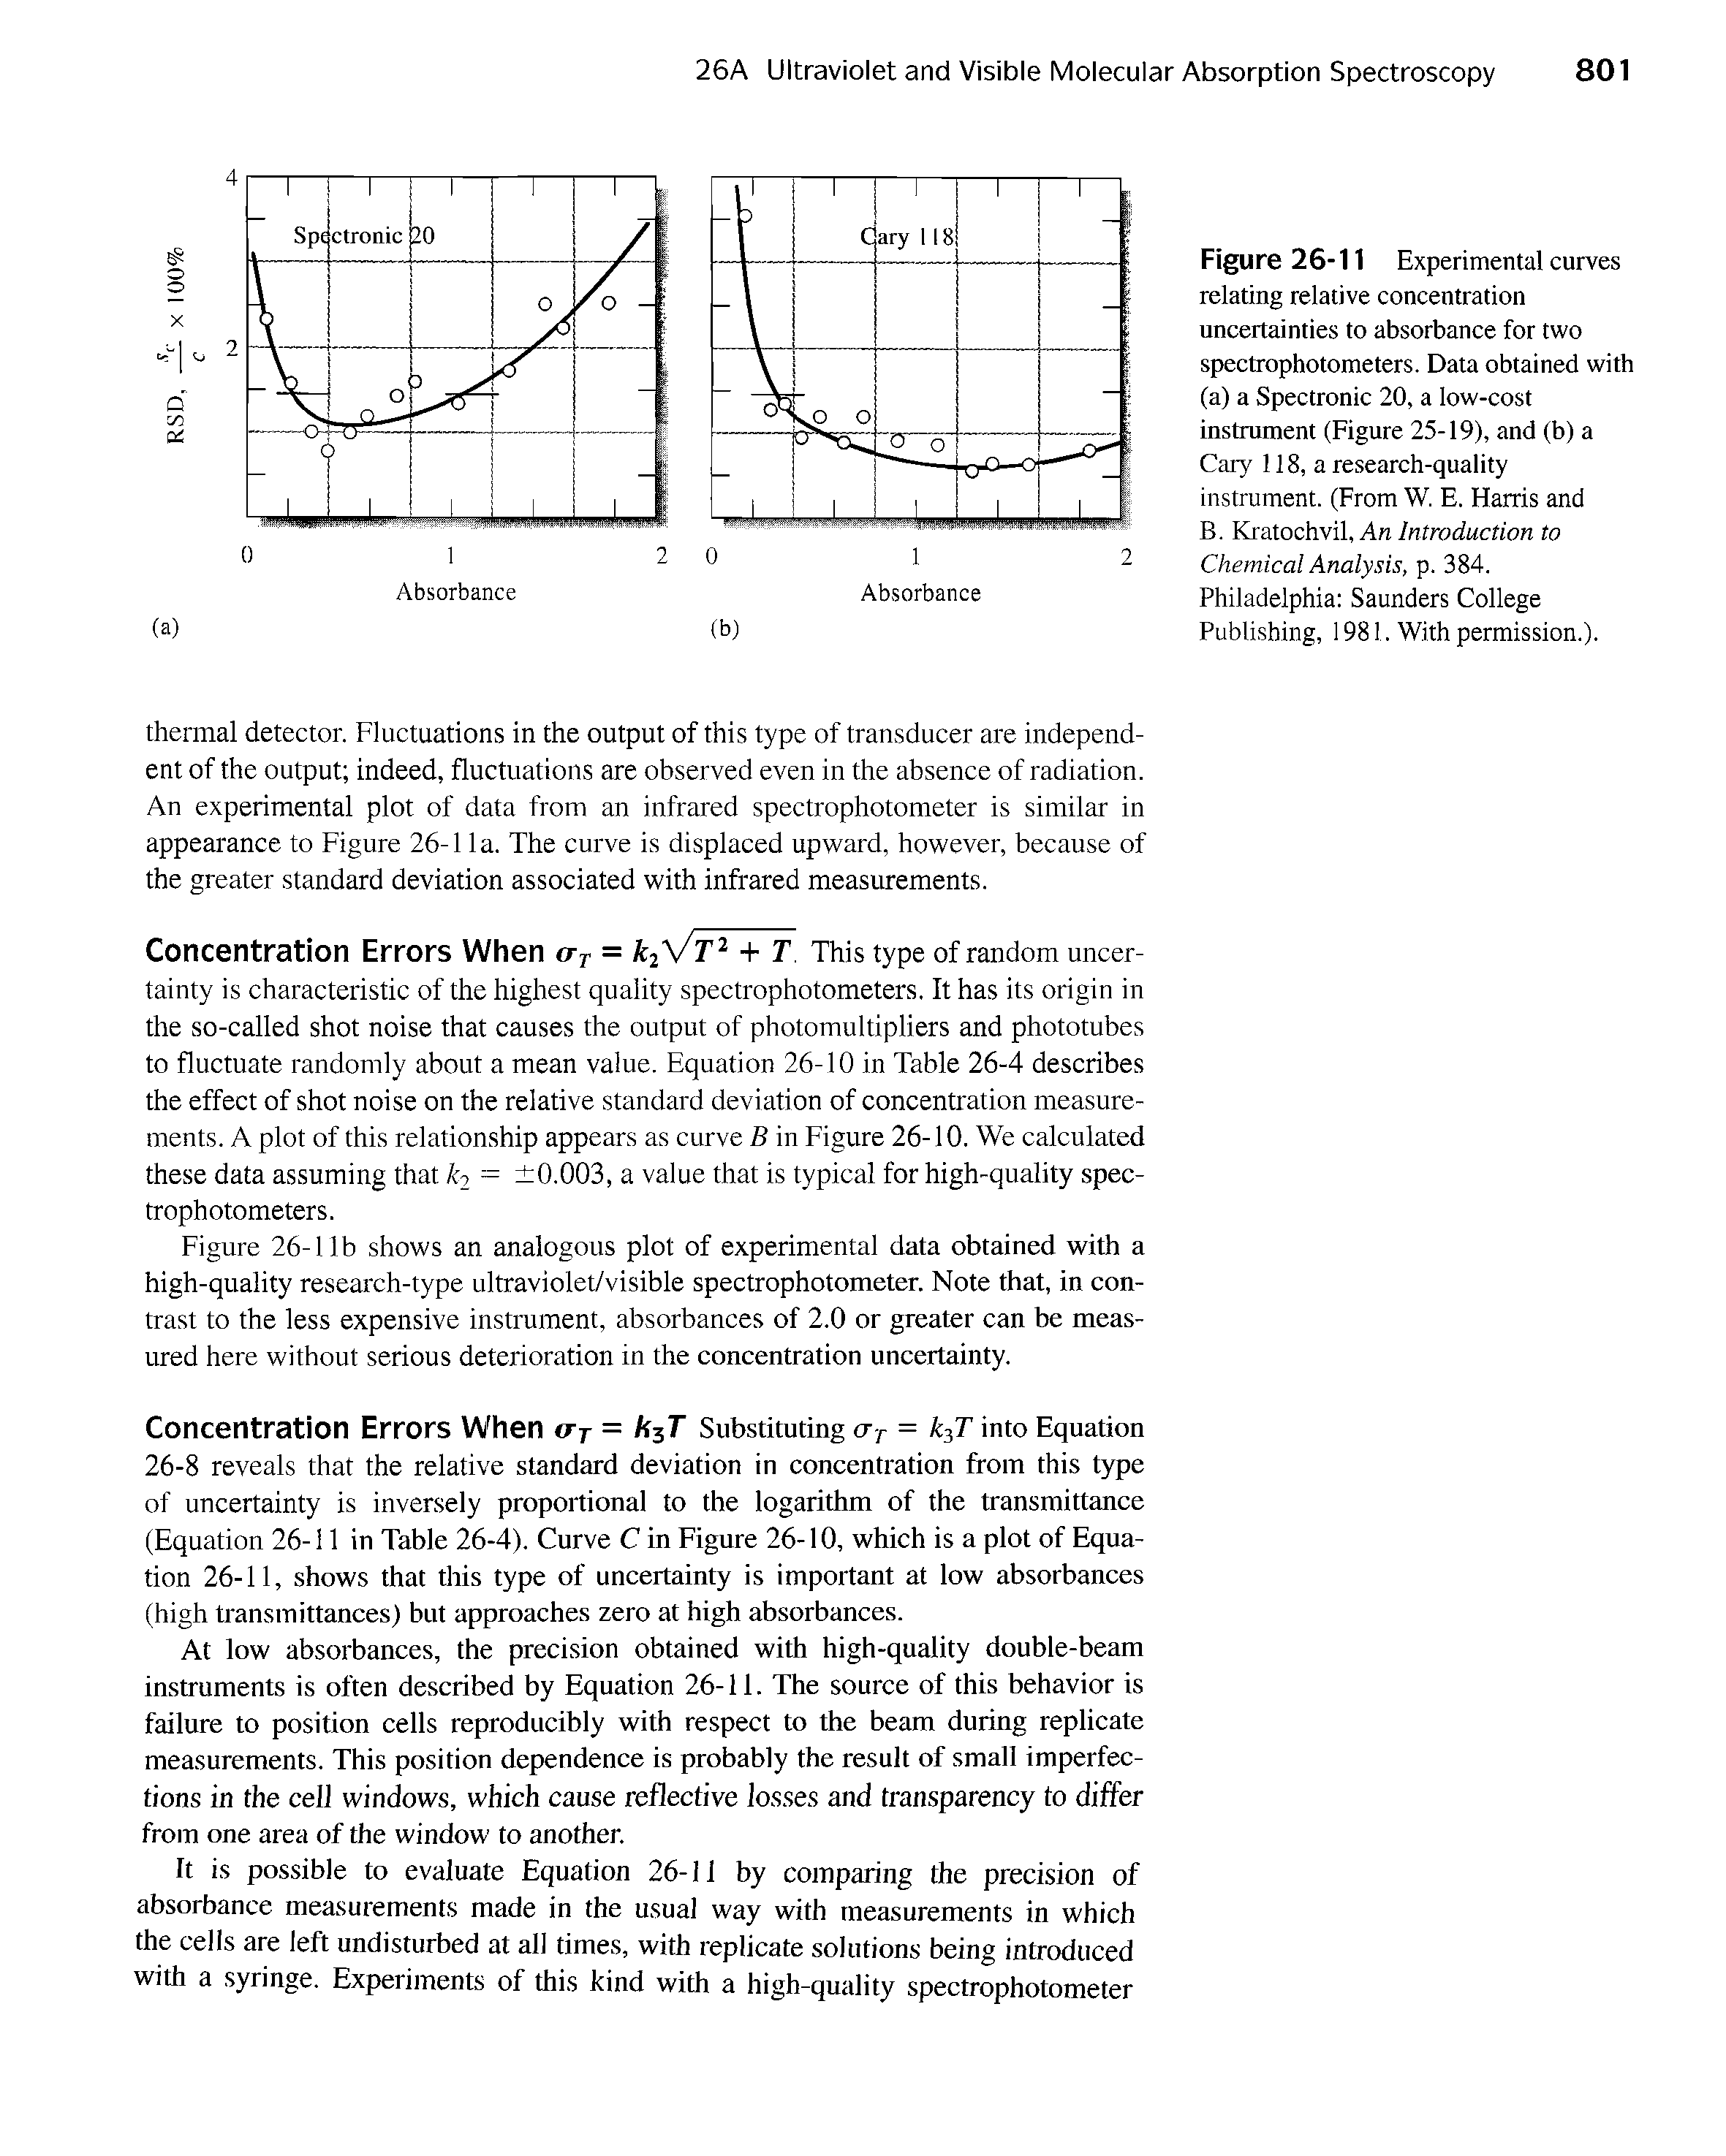 Figure 26-11 Experimental curves relating relative concentration uncertainties to absorbance for two spectrophotometers. Data obtained with (a) a Spectronic 20, a low-cost instrument (Figure 25-19), and (b) a Cary 118, a research-quality instrument. (From W. E. Harris and B. Kratochvil, An Introduction to Chemical Analysis, p. 384.